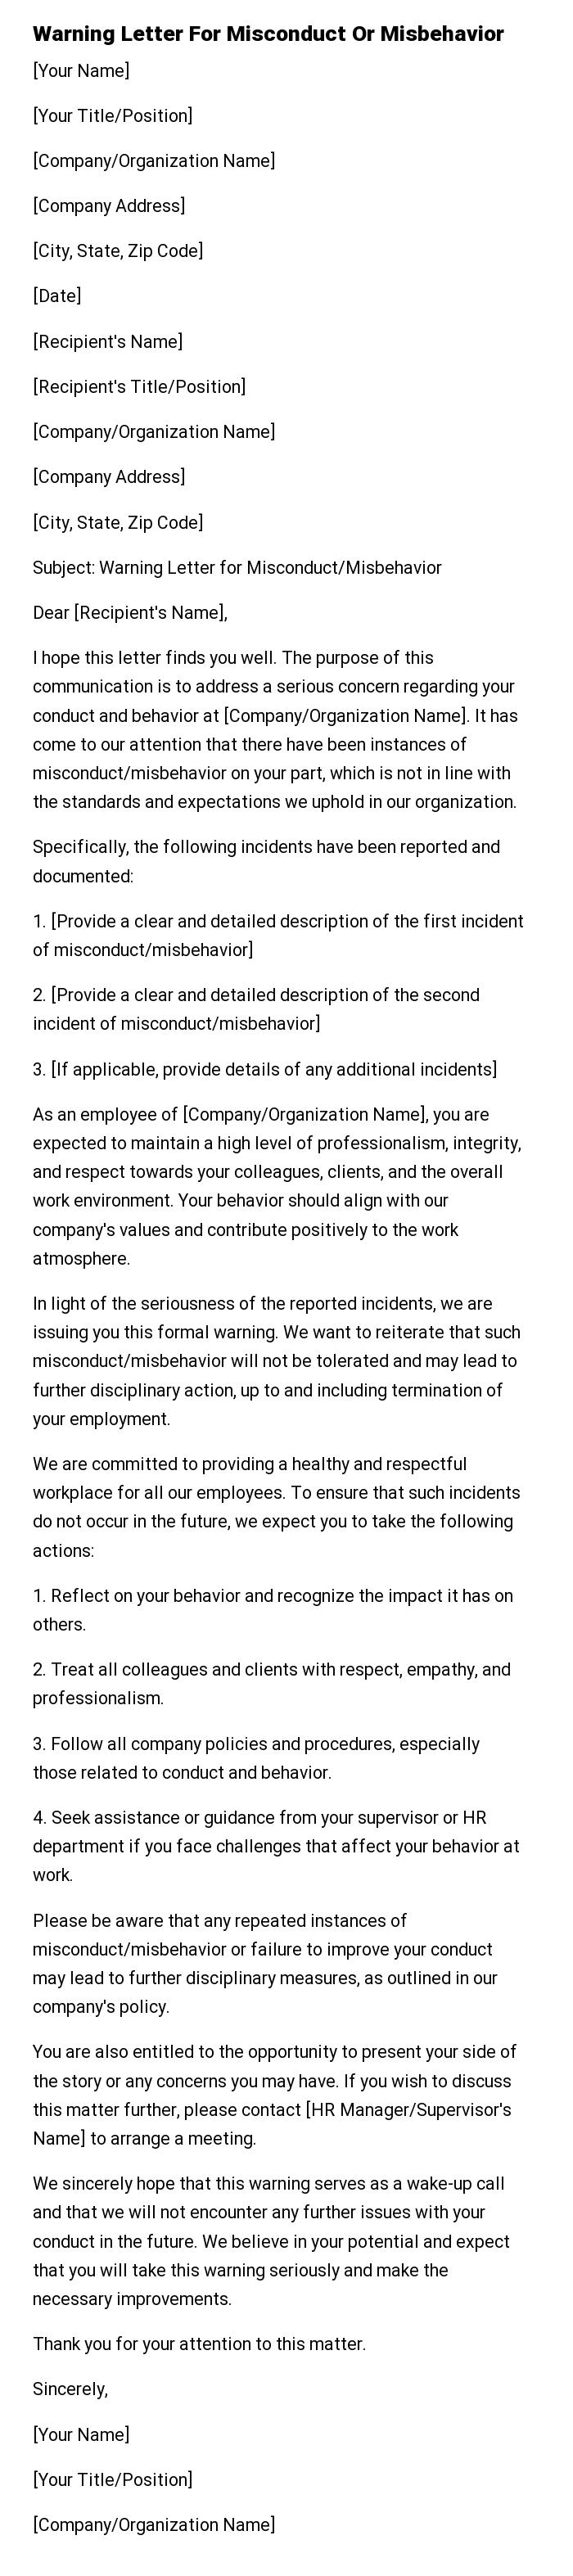 Warning Letter For Misconduct Or Misbehavior